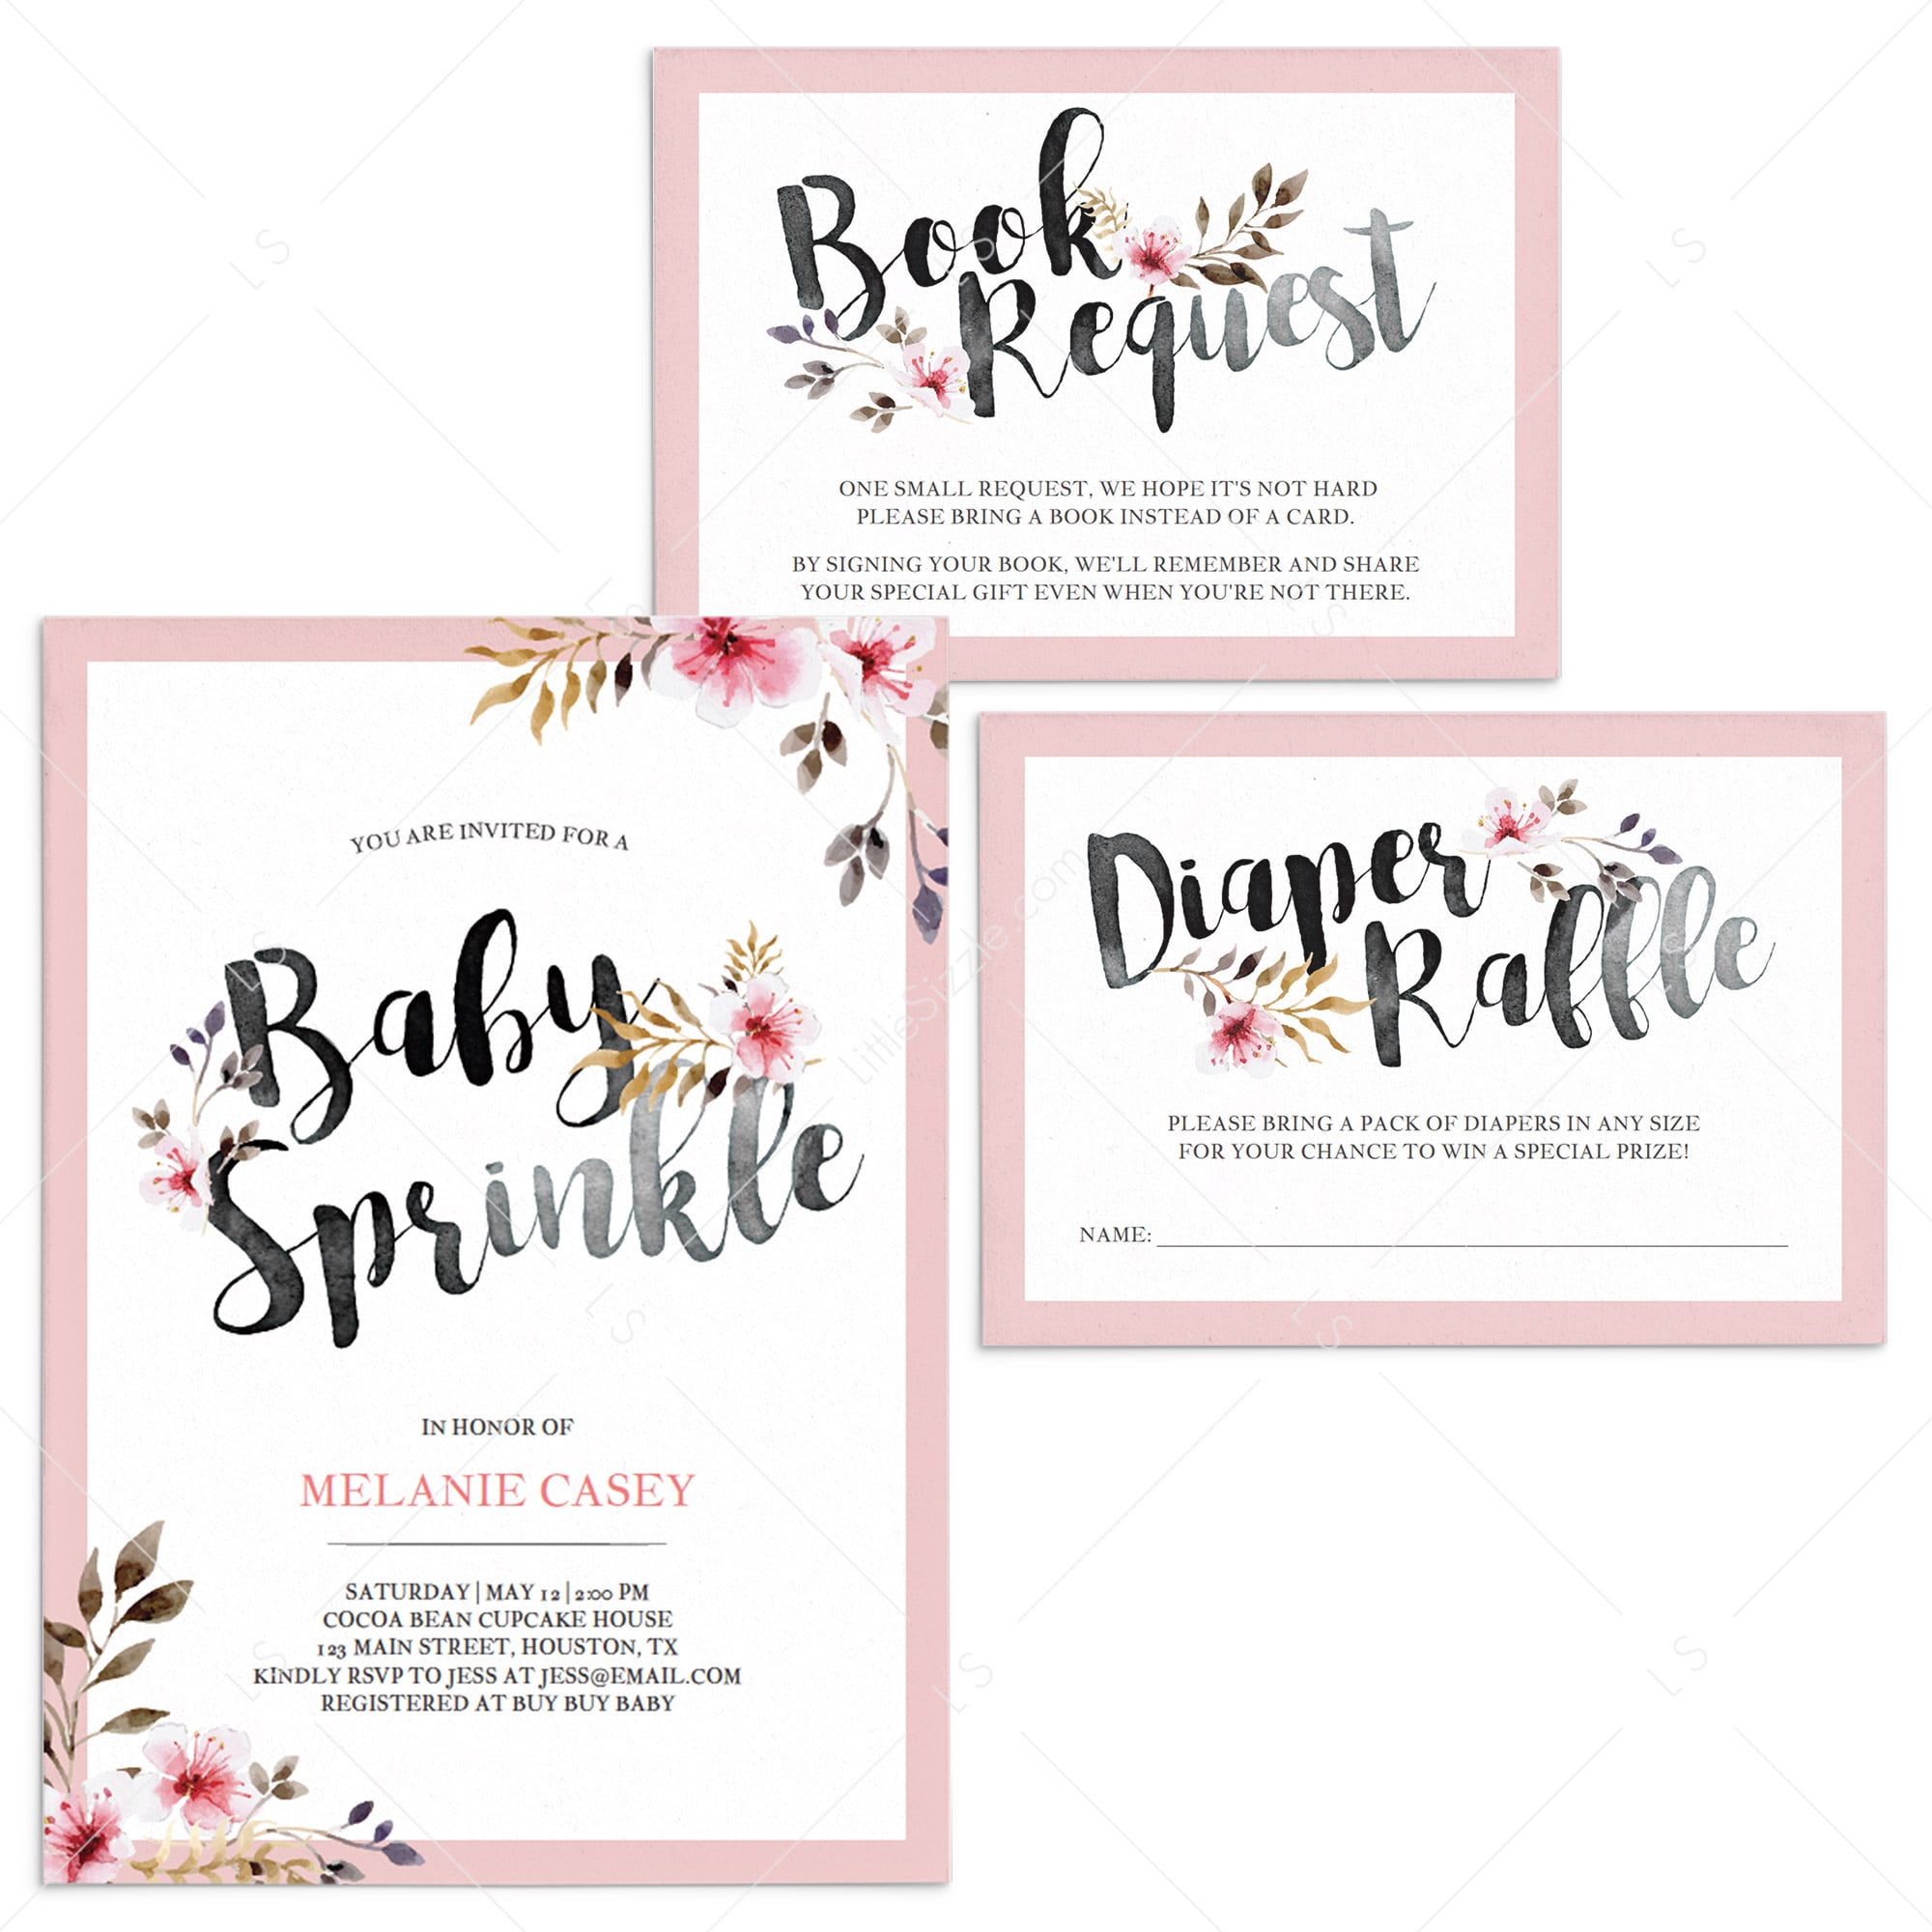 Baby sprinkle invitation set floral editable template by LittleSizzle